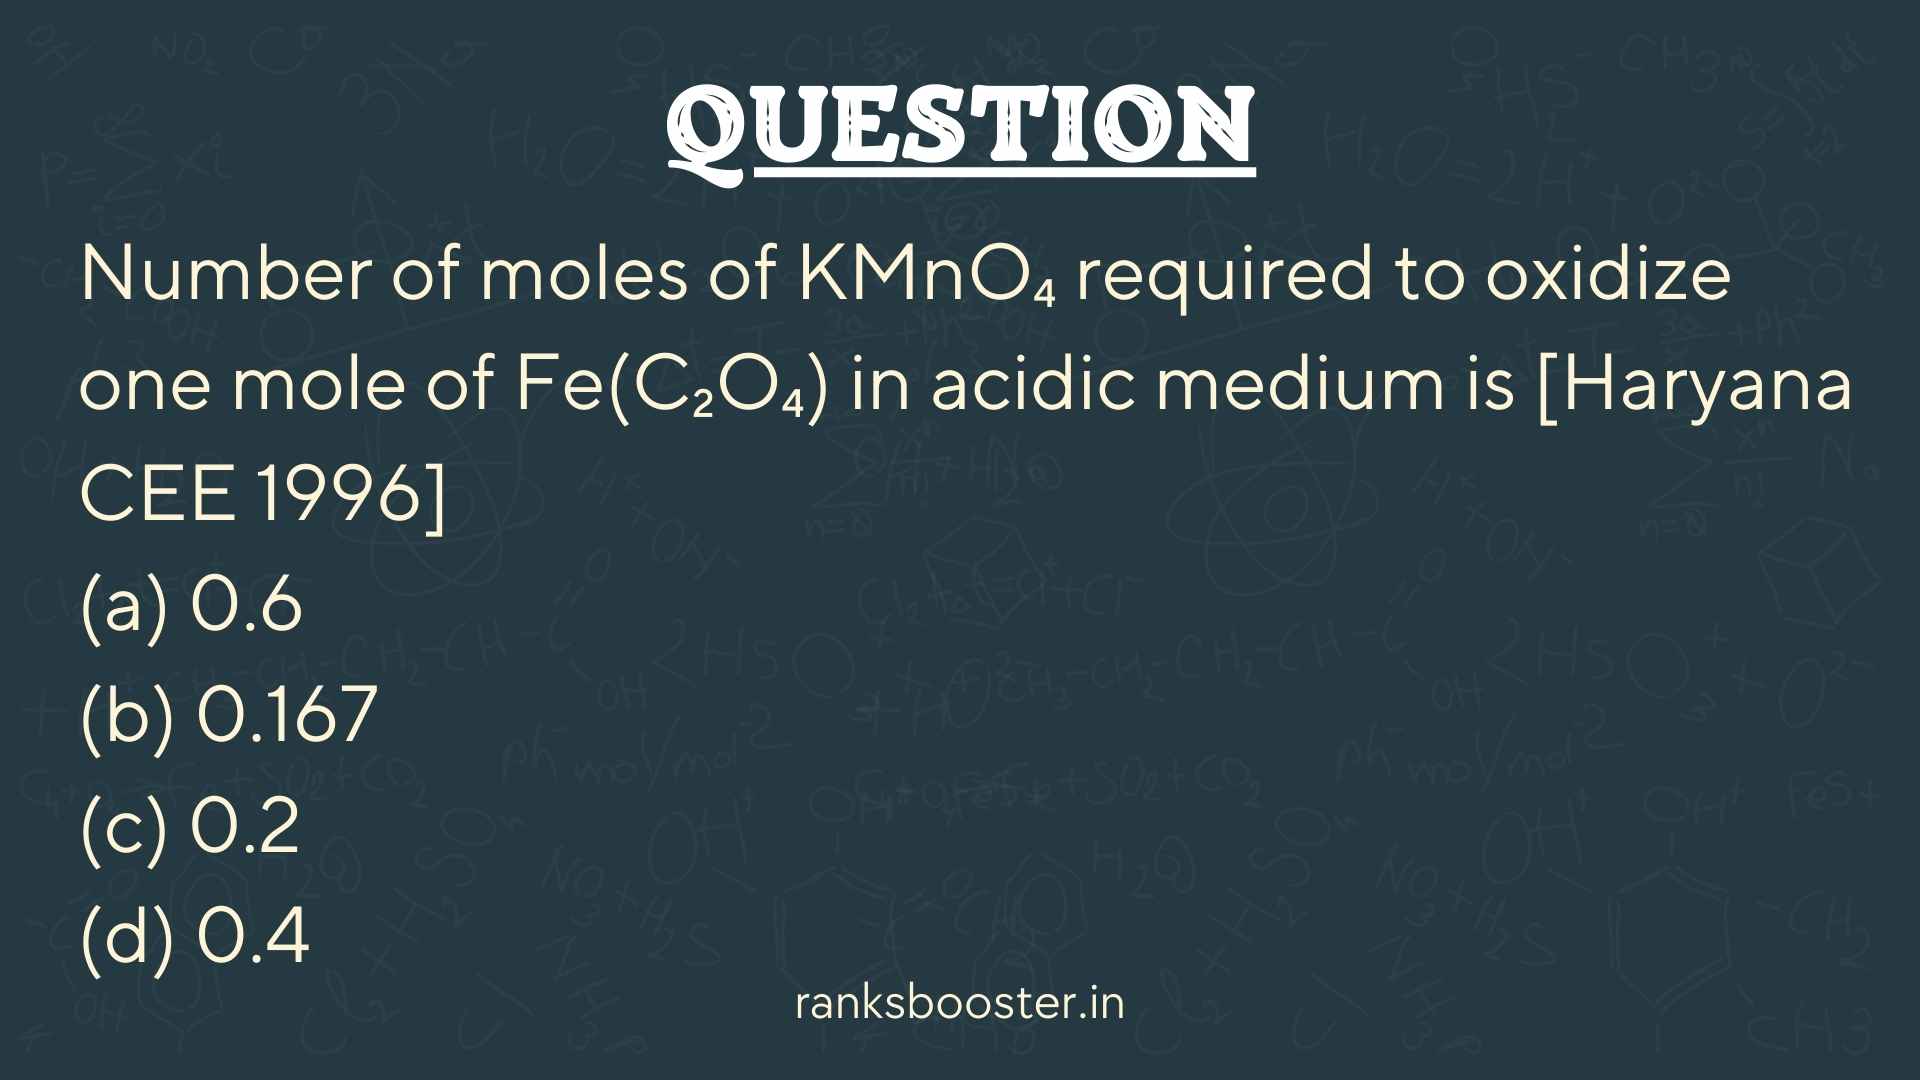 Question: Number of moles of KMnO₄ required to oxidize one mole of Fe(C₂O₄) in acidic medium is [Haryana CEE 1996] (a) 0.6 (b) 0.167 (c) 0.2 (d) 0.4